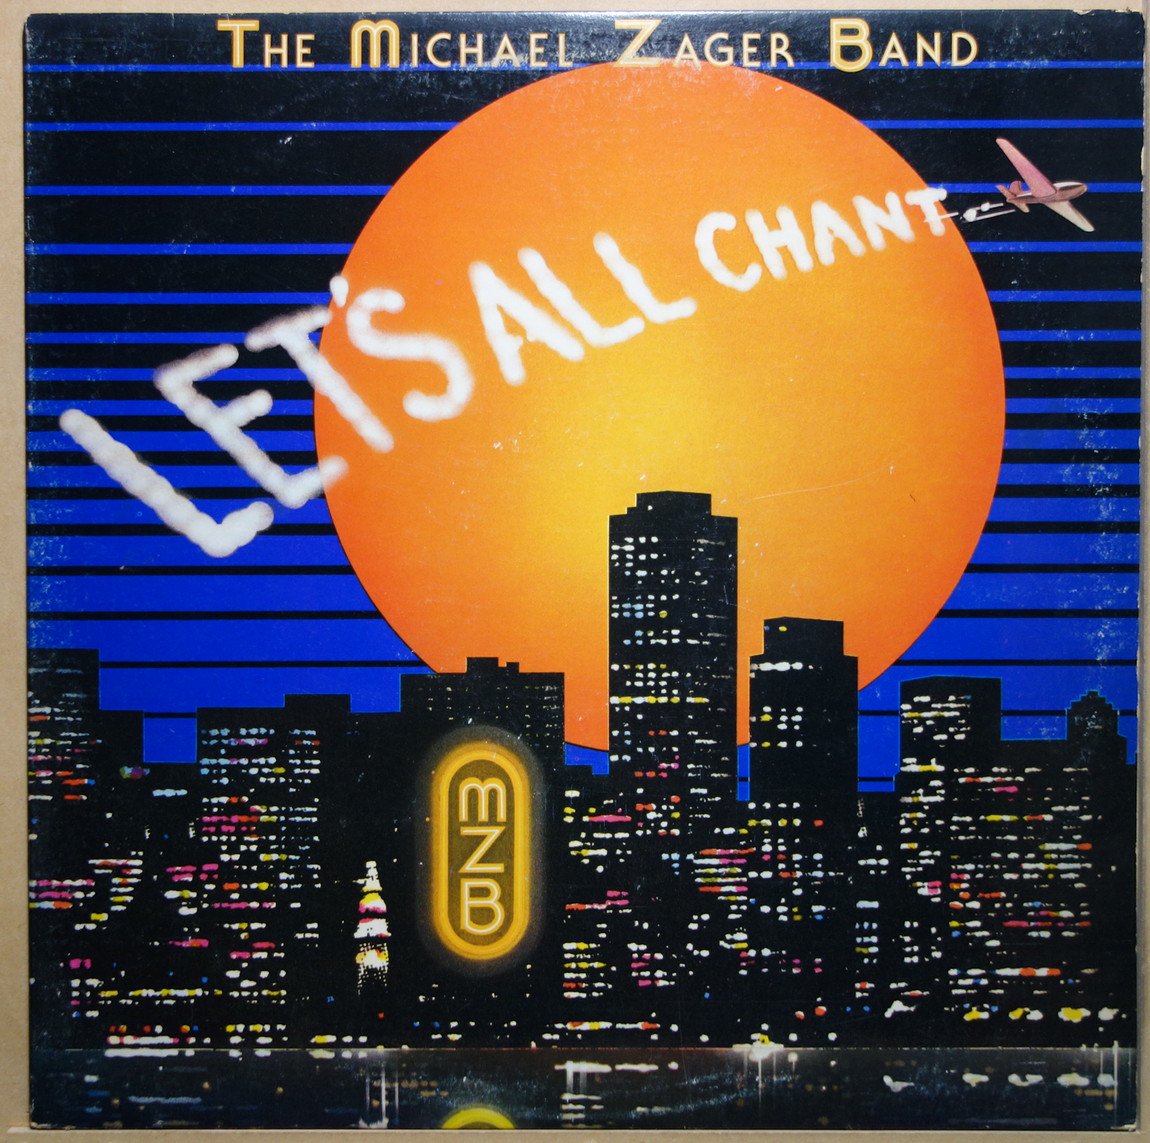 The Michael Zager Band - Let's All Chant - Vinylian - Vintage Vinyl Record  Shop